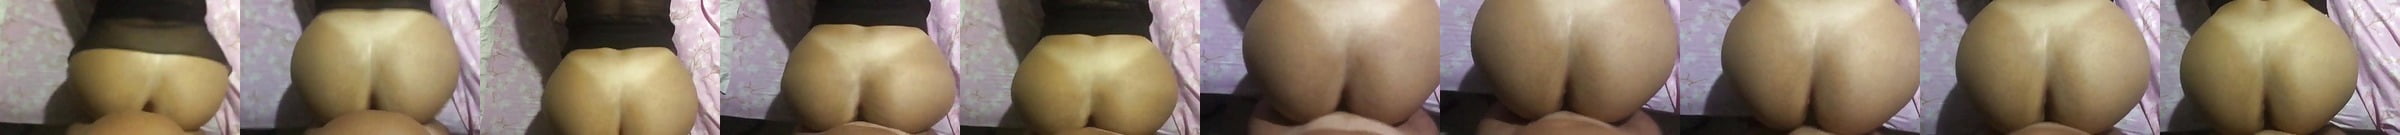 Rubbing In Her Panty Covered Pussy Free Porn 63 Xhamster Xhamster